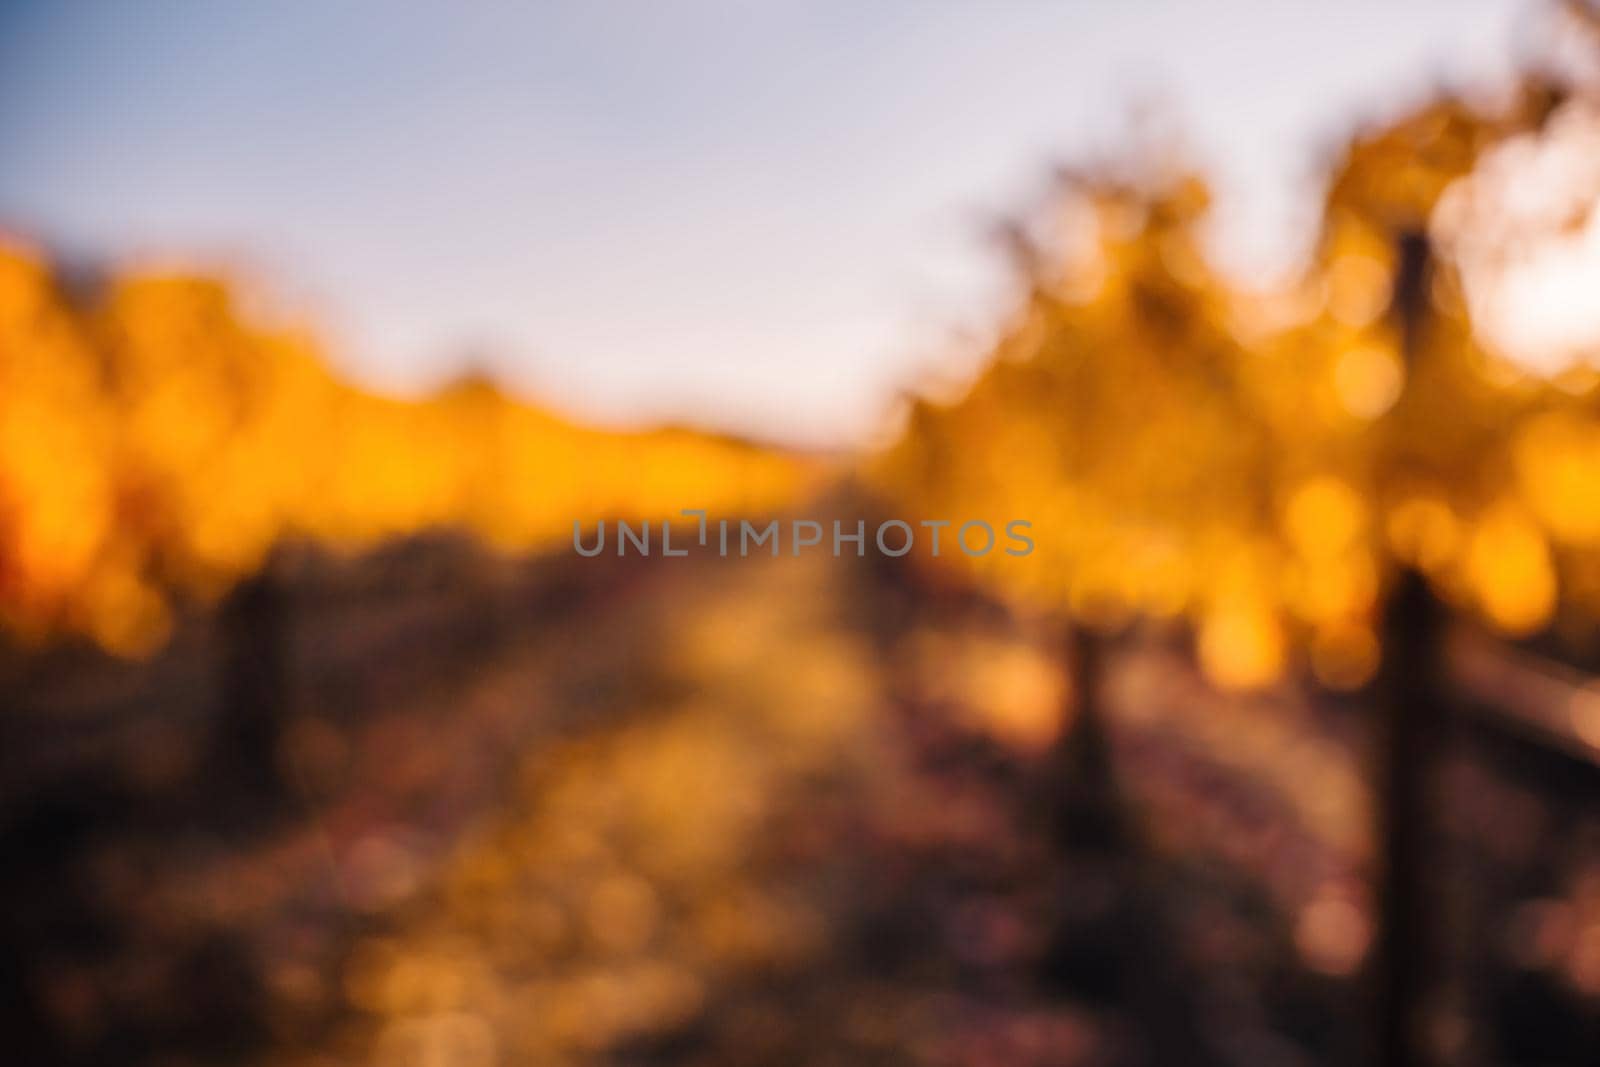 Abstract defocused bright autumn red orange yellow grapevine leaves at vineyard in warm sunset sunlight. Beautiful clusters of ripening grapes. Winemaking and organic fruit gardening. by panophotograph